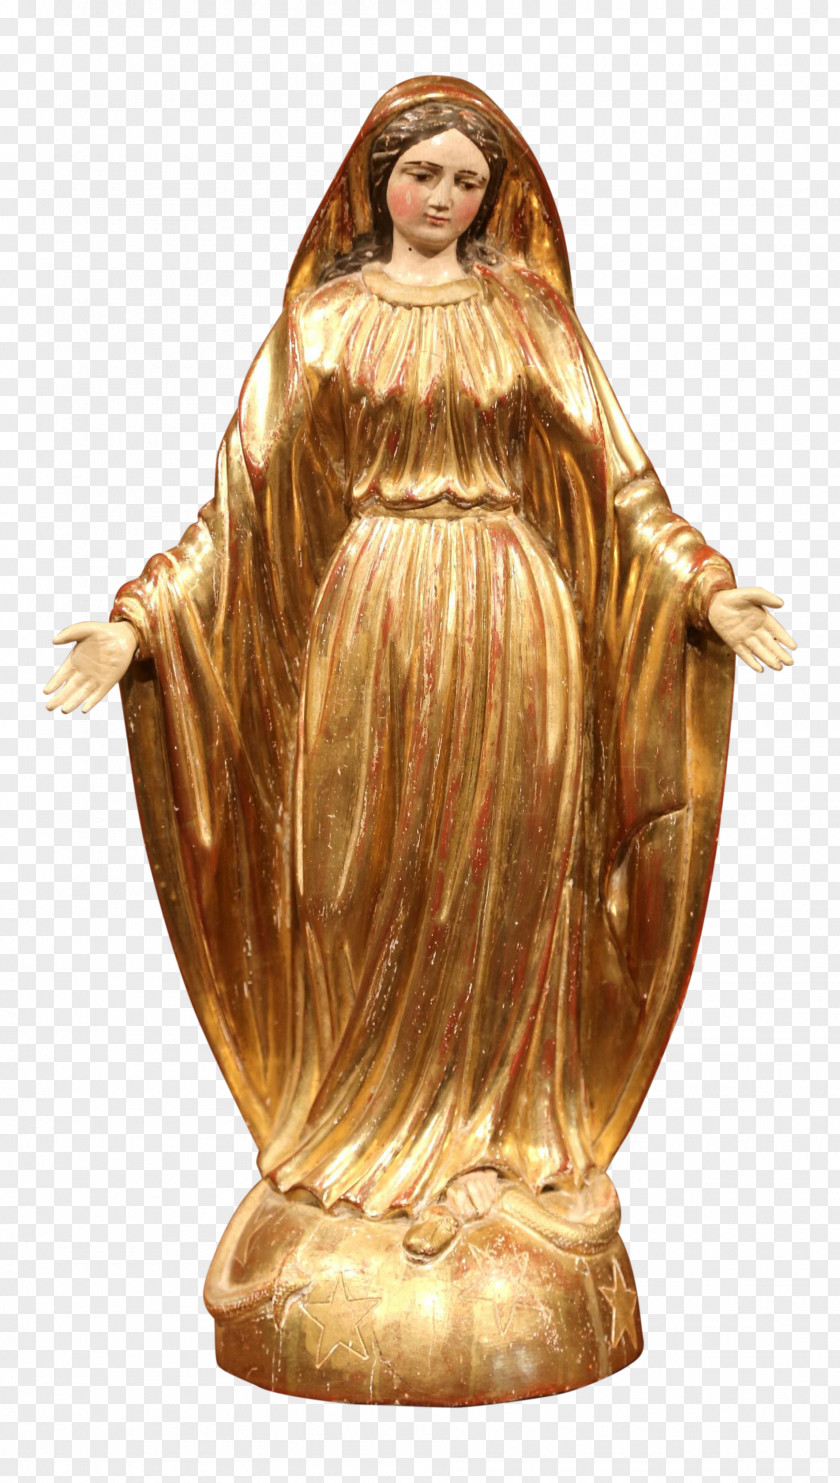 Virgin Mary Statue Figurine Bust Sculpture Polychrome PNG